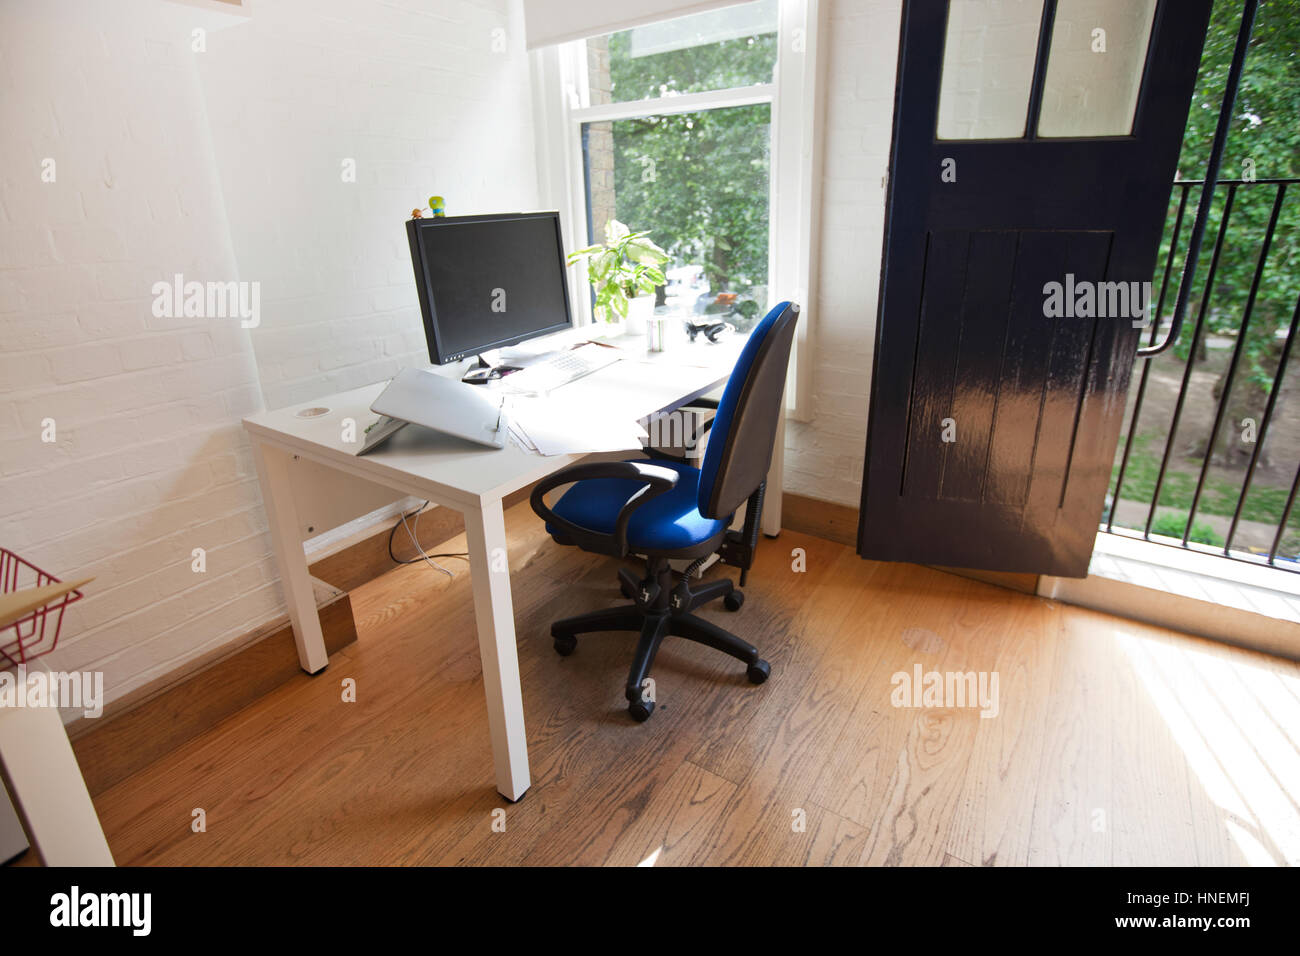 Interior of office with computer on desk Stock Photo